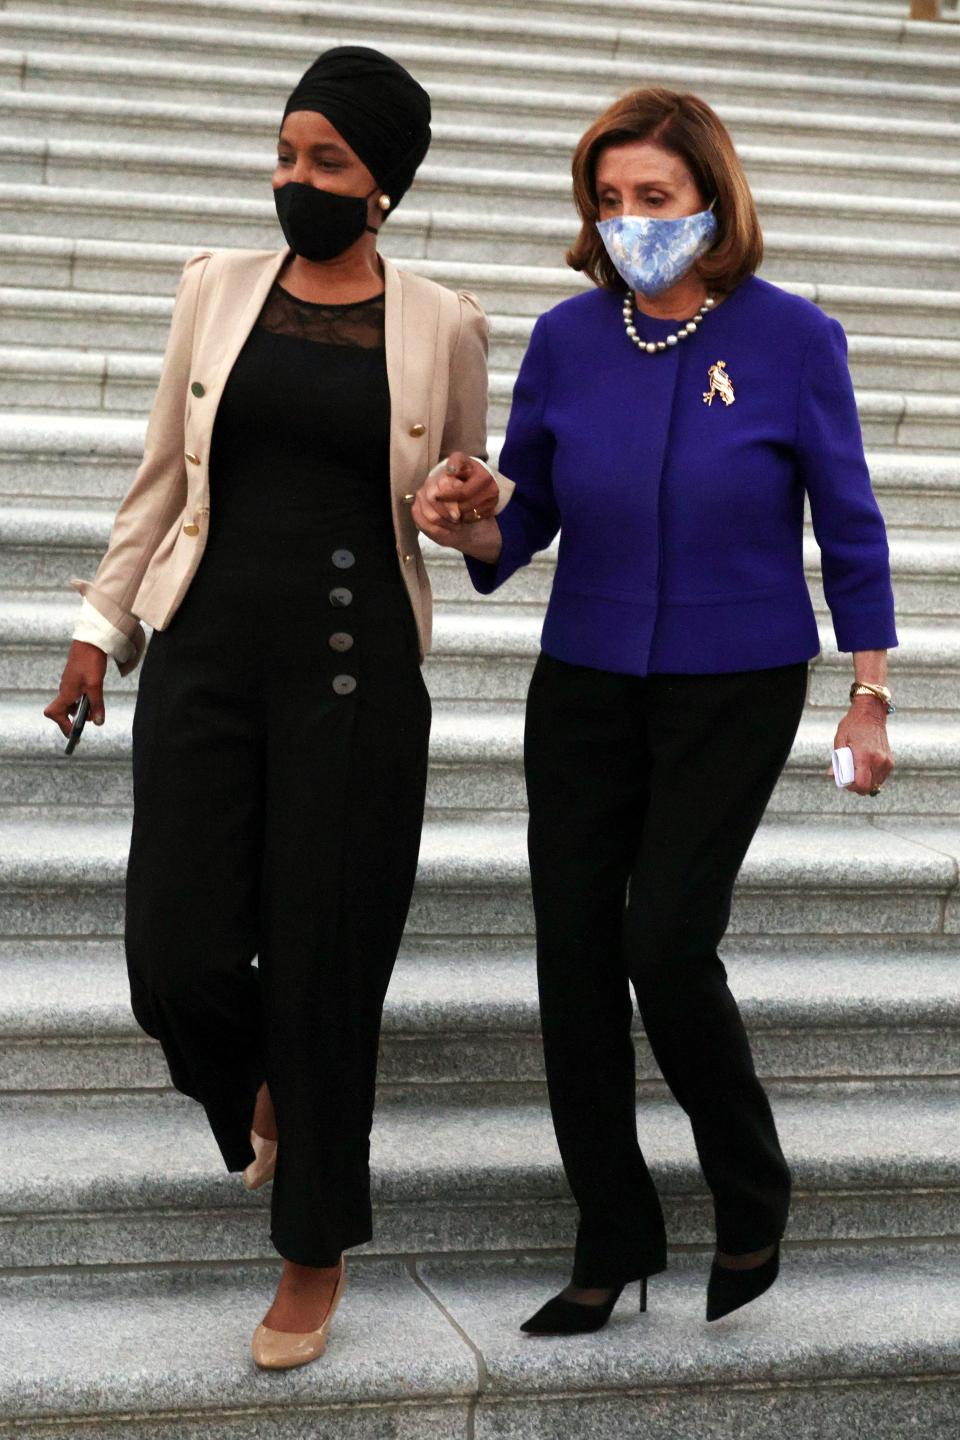 House Speaker of the HNancy Pelosi, D-Calif., (right)  and Rep. Ilhan Omar, D-Minn., (left) hold hands as they arrive at a group photo to mark the National Recovery Month outside the U.S. Capitol on Sept. 27, 2021 in Washington, D.C.